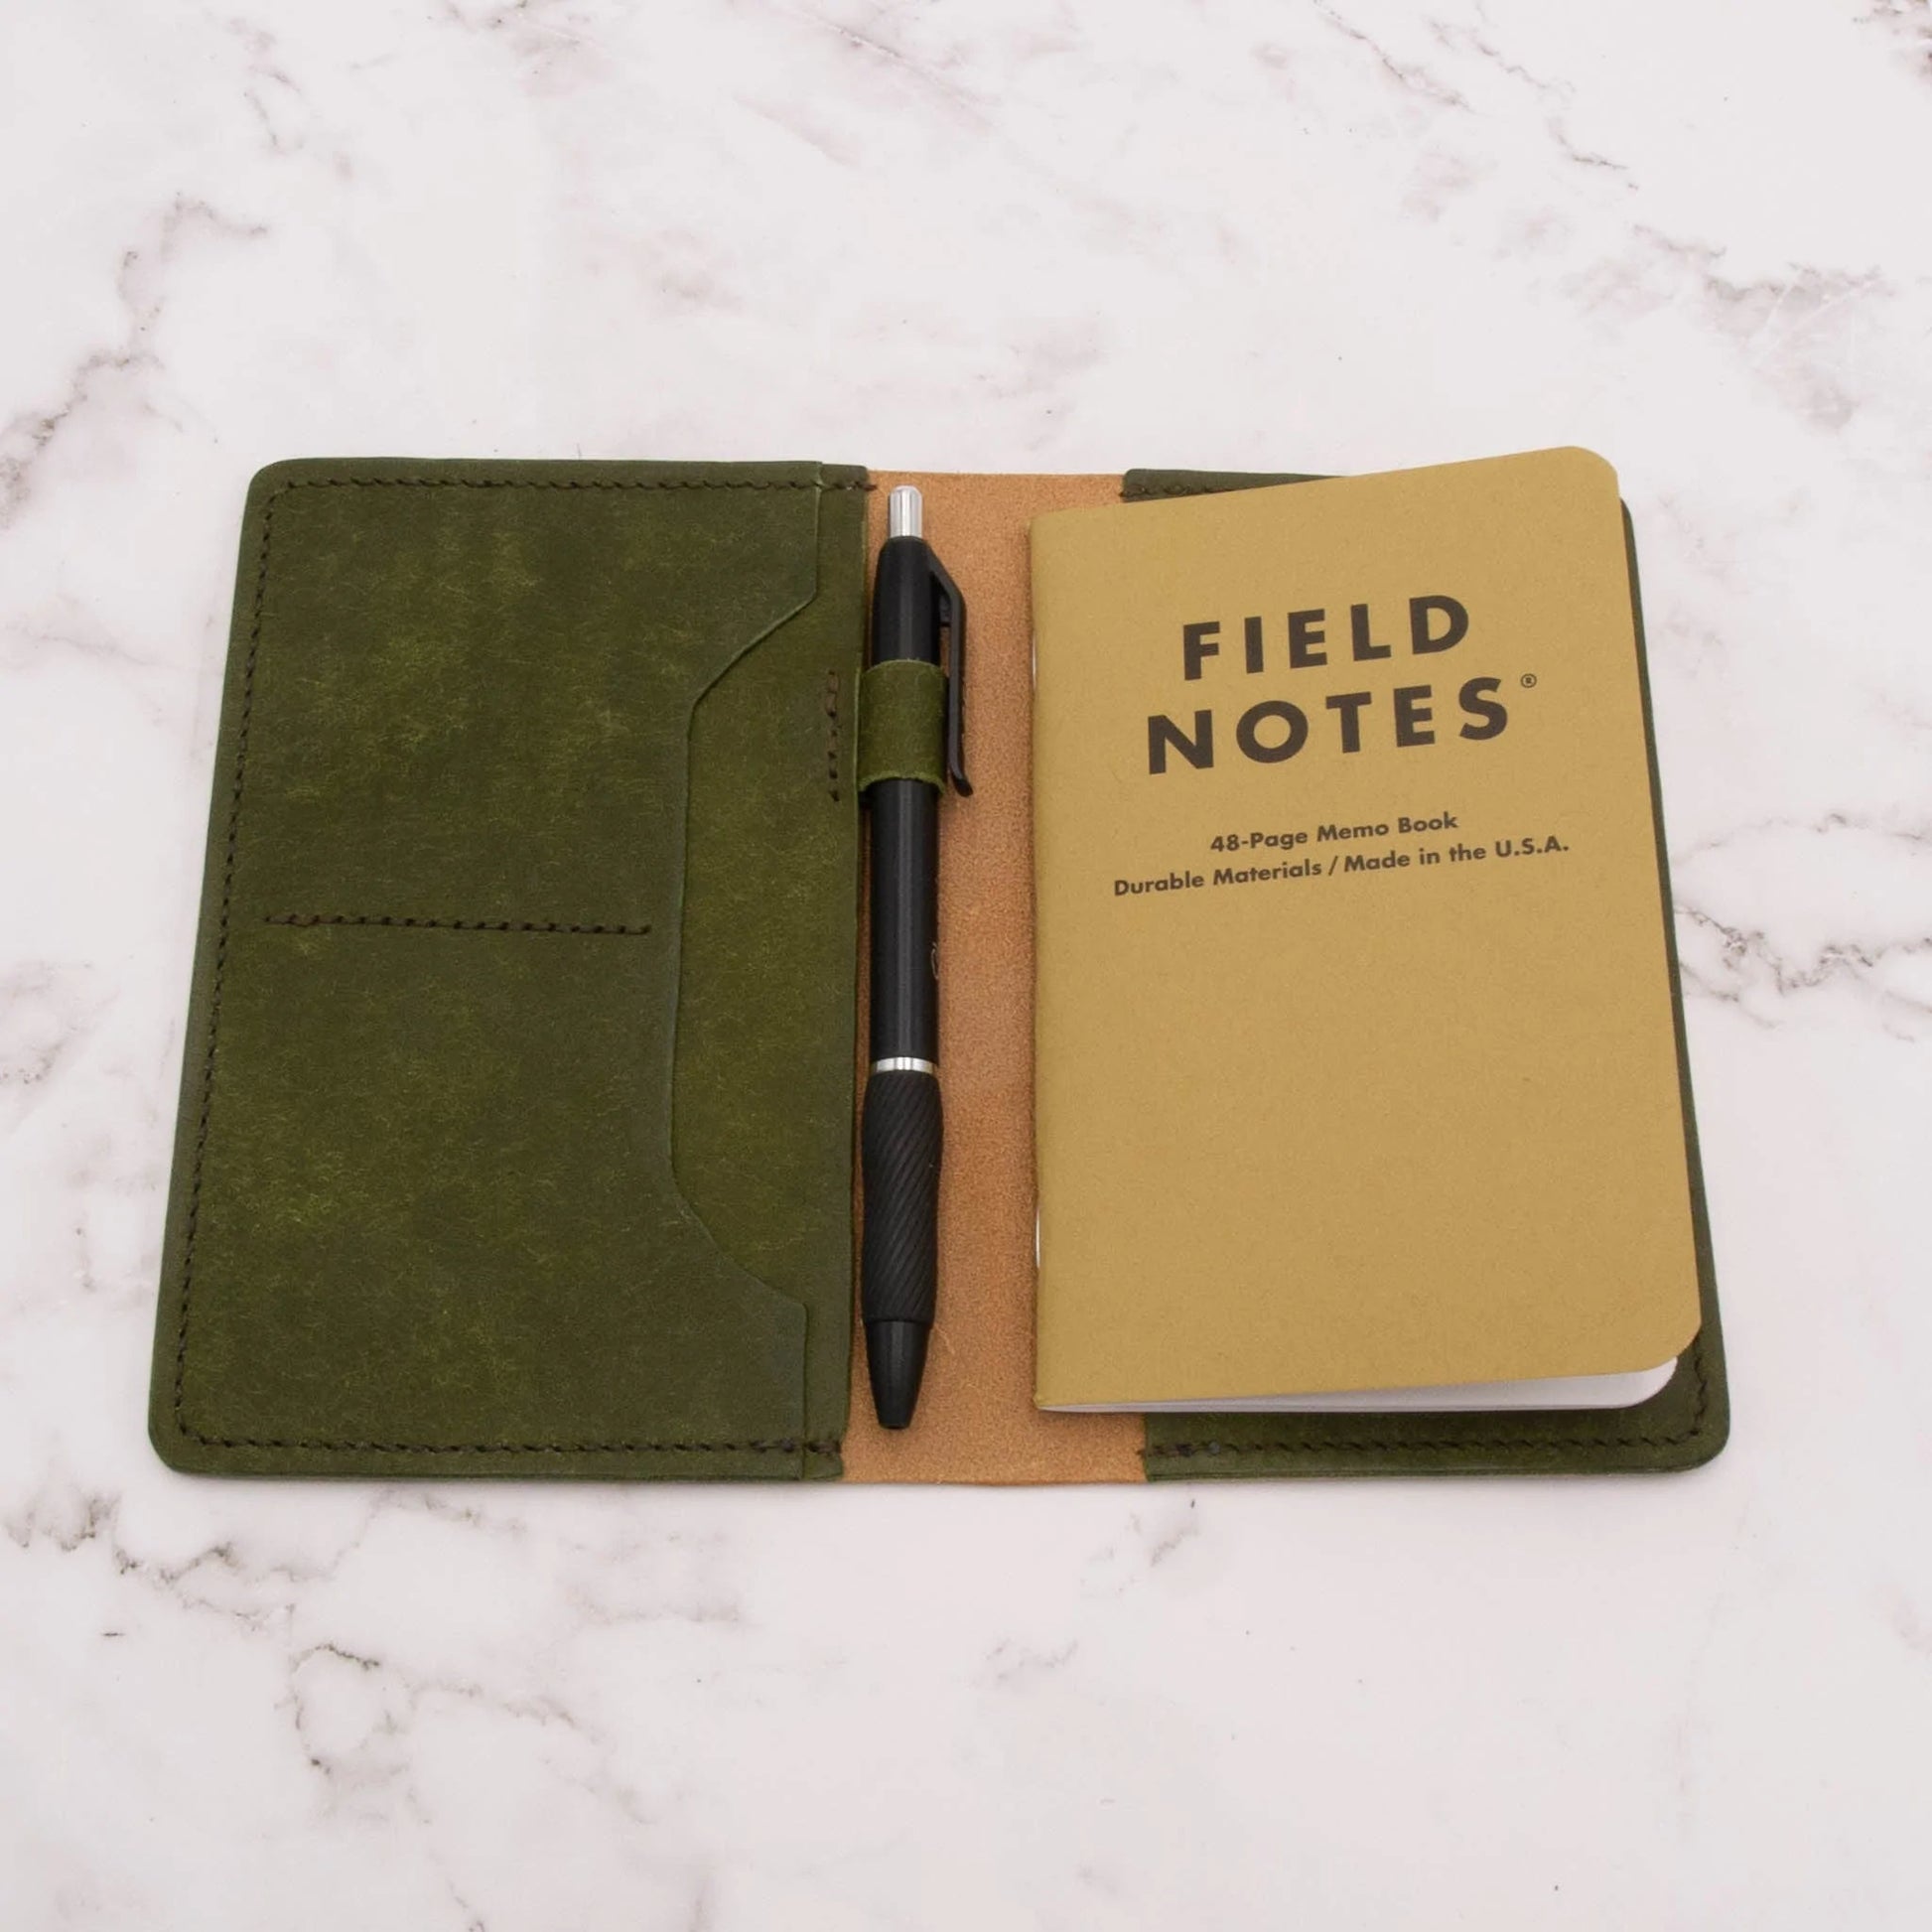 Arbor Trading Post Field Note Cover Handcrafted Leather Field Notes Cover - Two Tone Colors